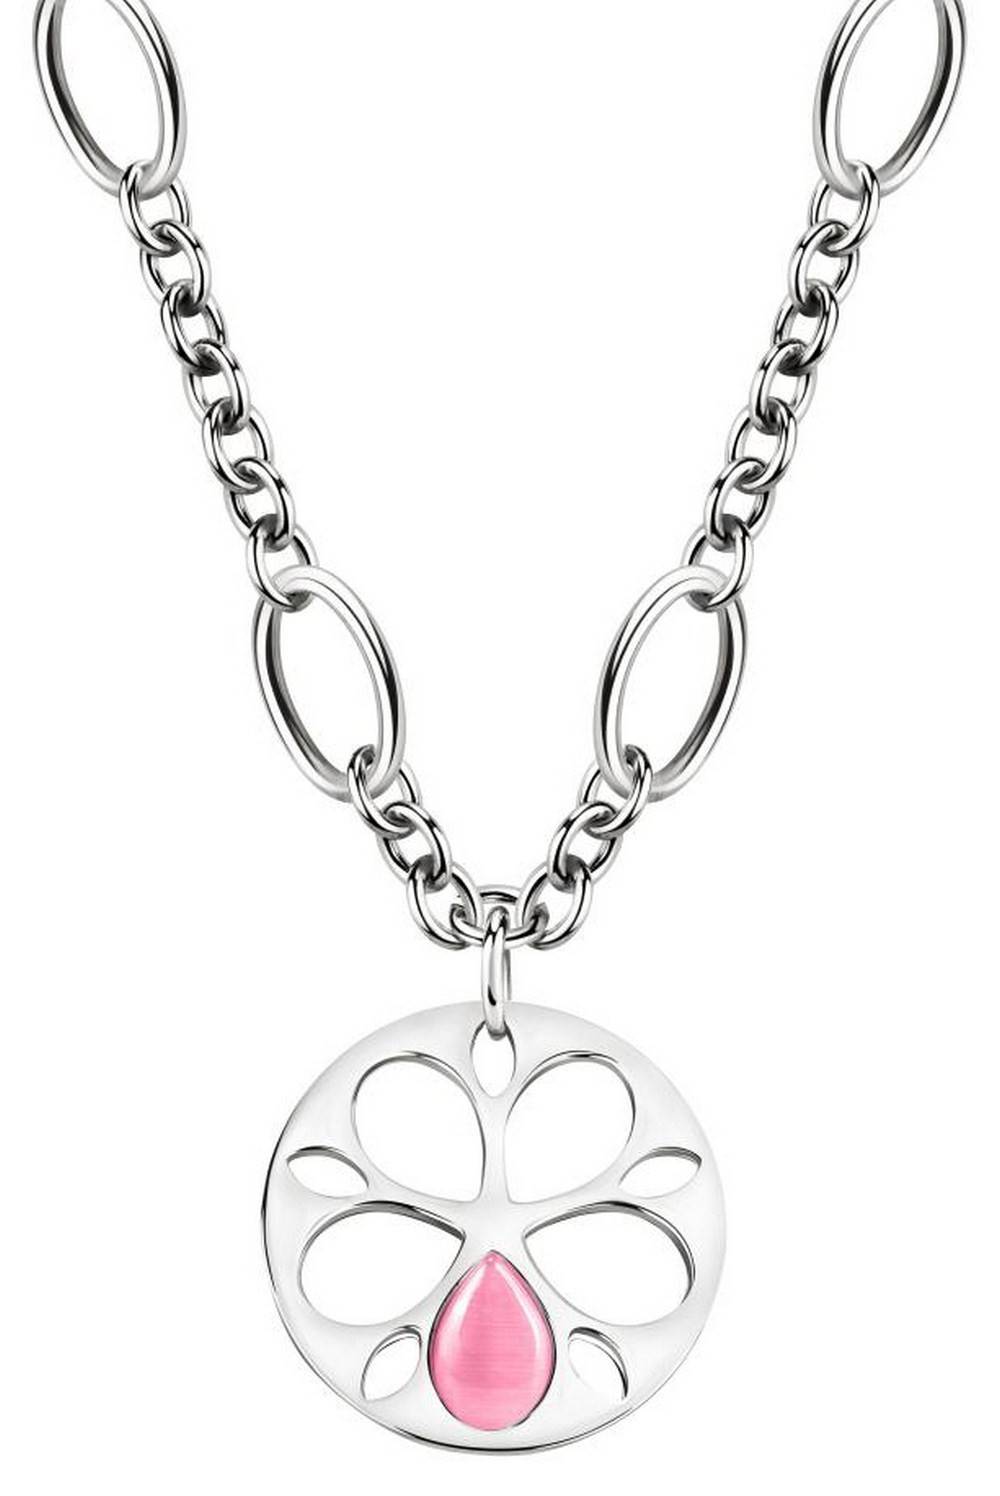 Morellato Fiore Stainless Steel Sate07 Women's Necklace